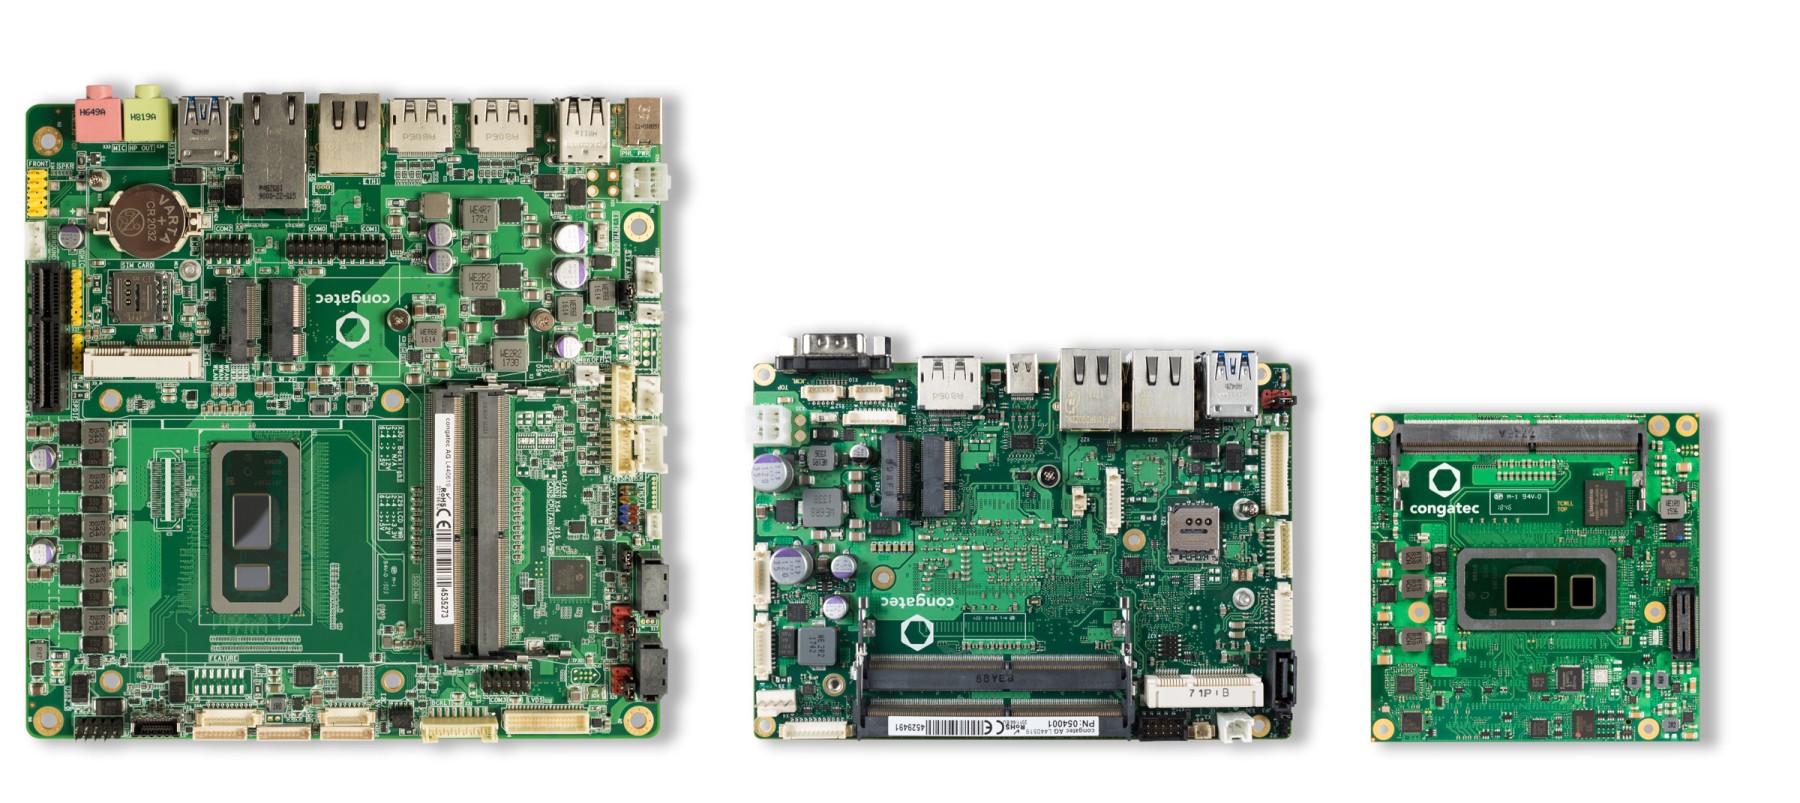 Congatec boards with 8th Gen Intel® Core™ Mobile processor and 10+ years availability